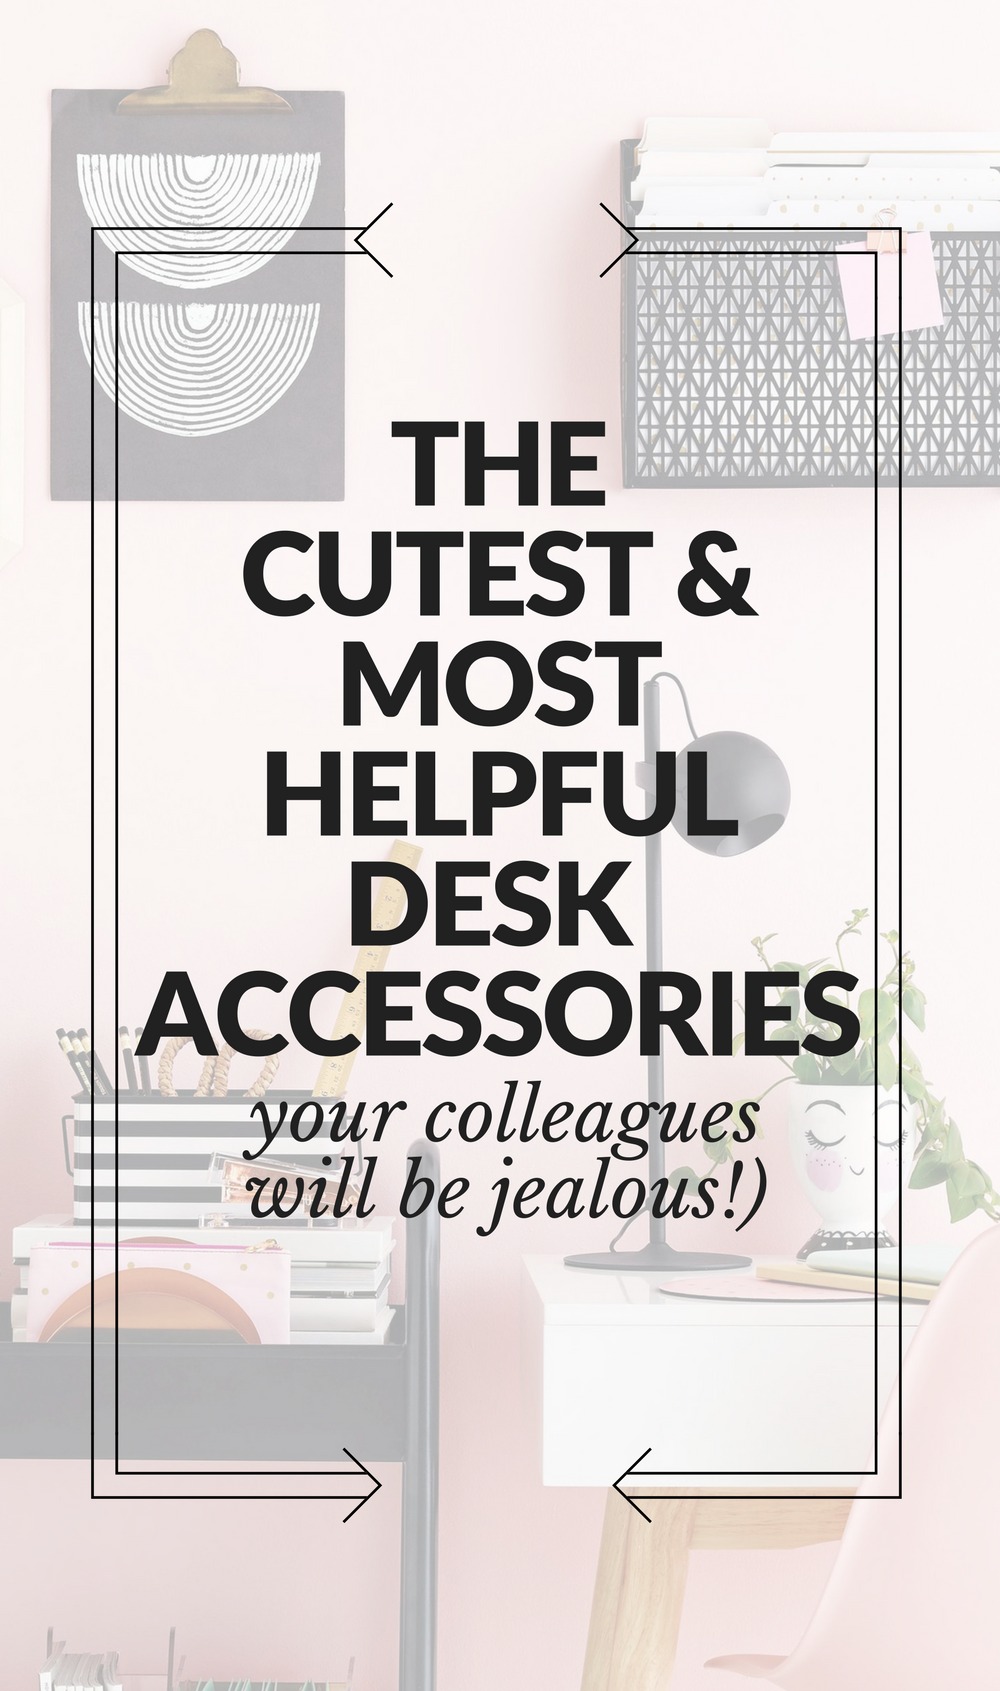 The cutest & most helpful desk accessories that will absolutely make your colleagues jealous // the modern savvy